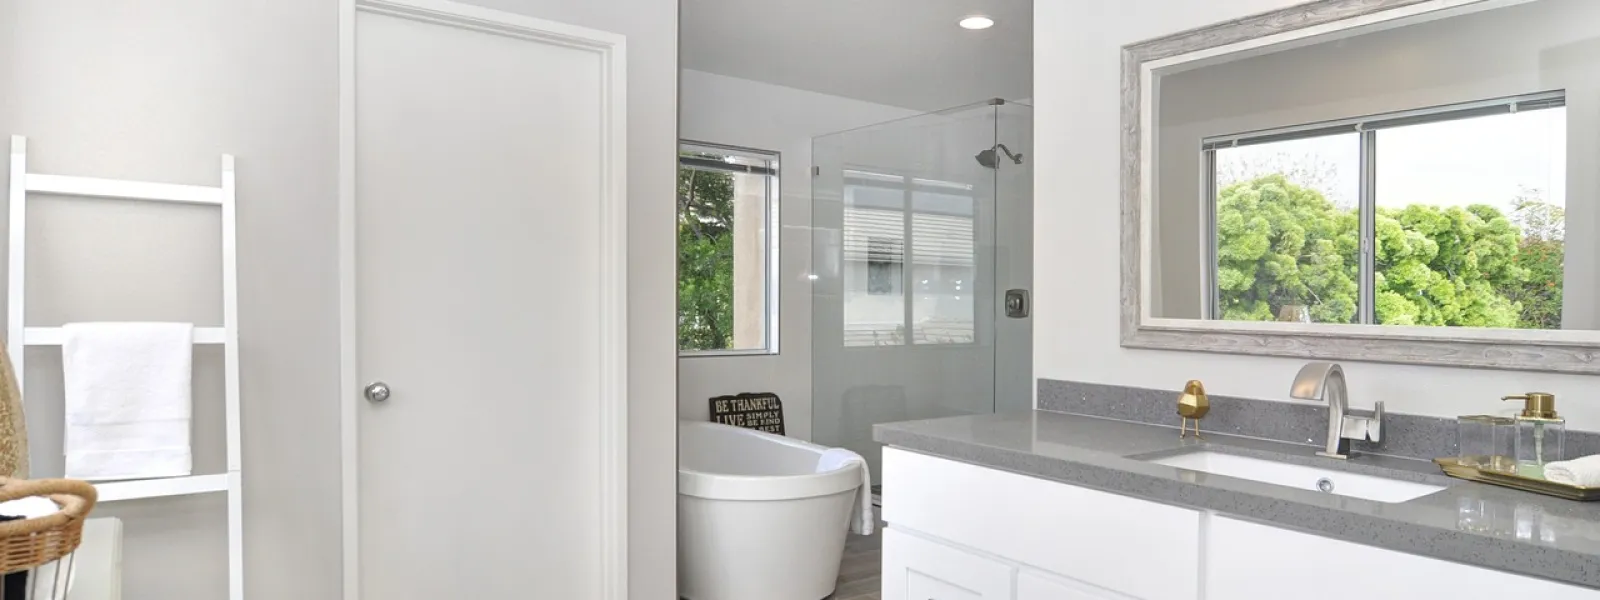 3 Bathroom Upgrades That Are Easier Than You Might Think